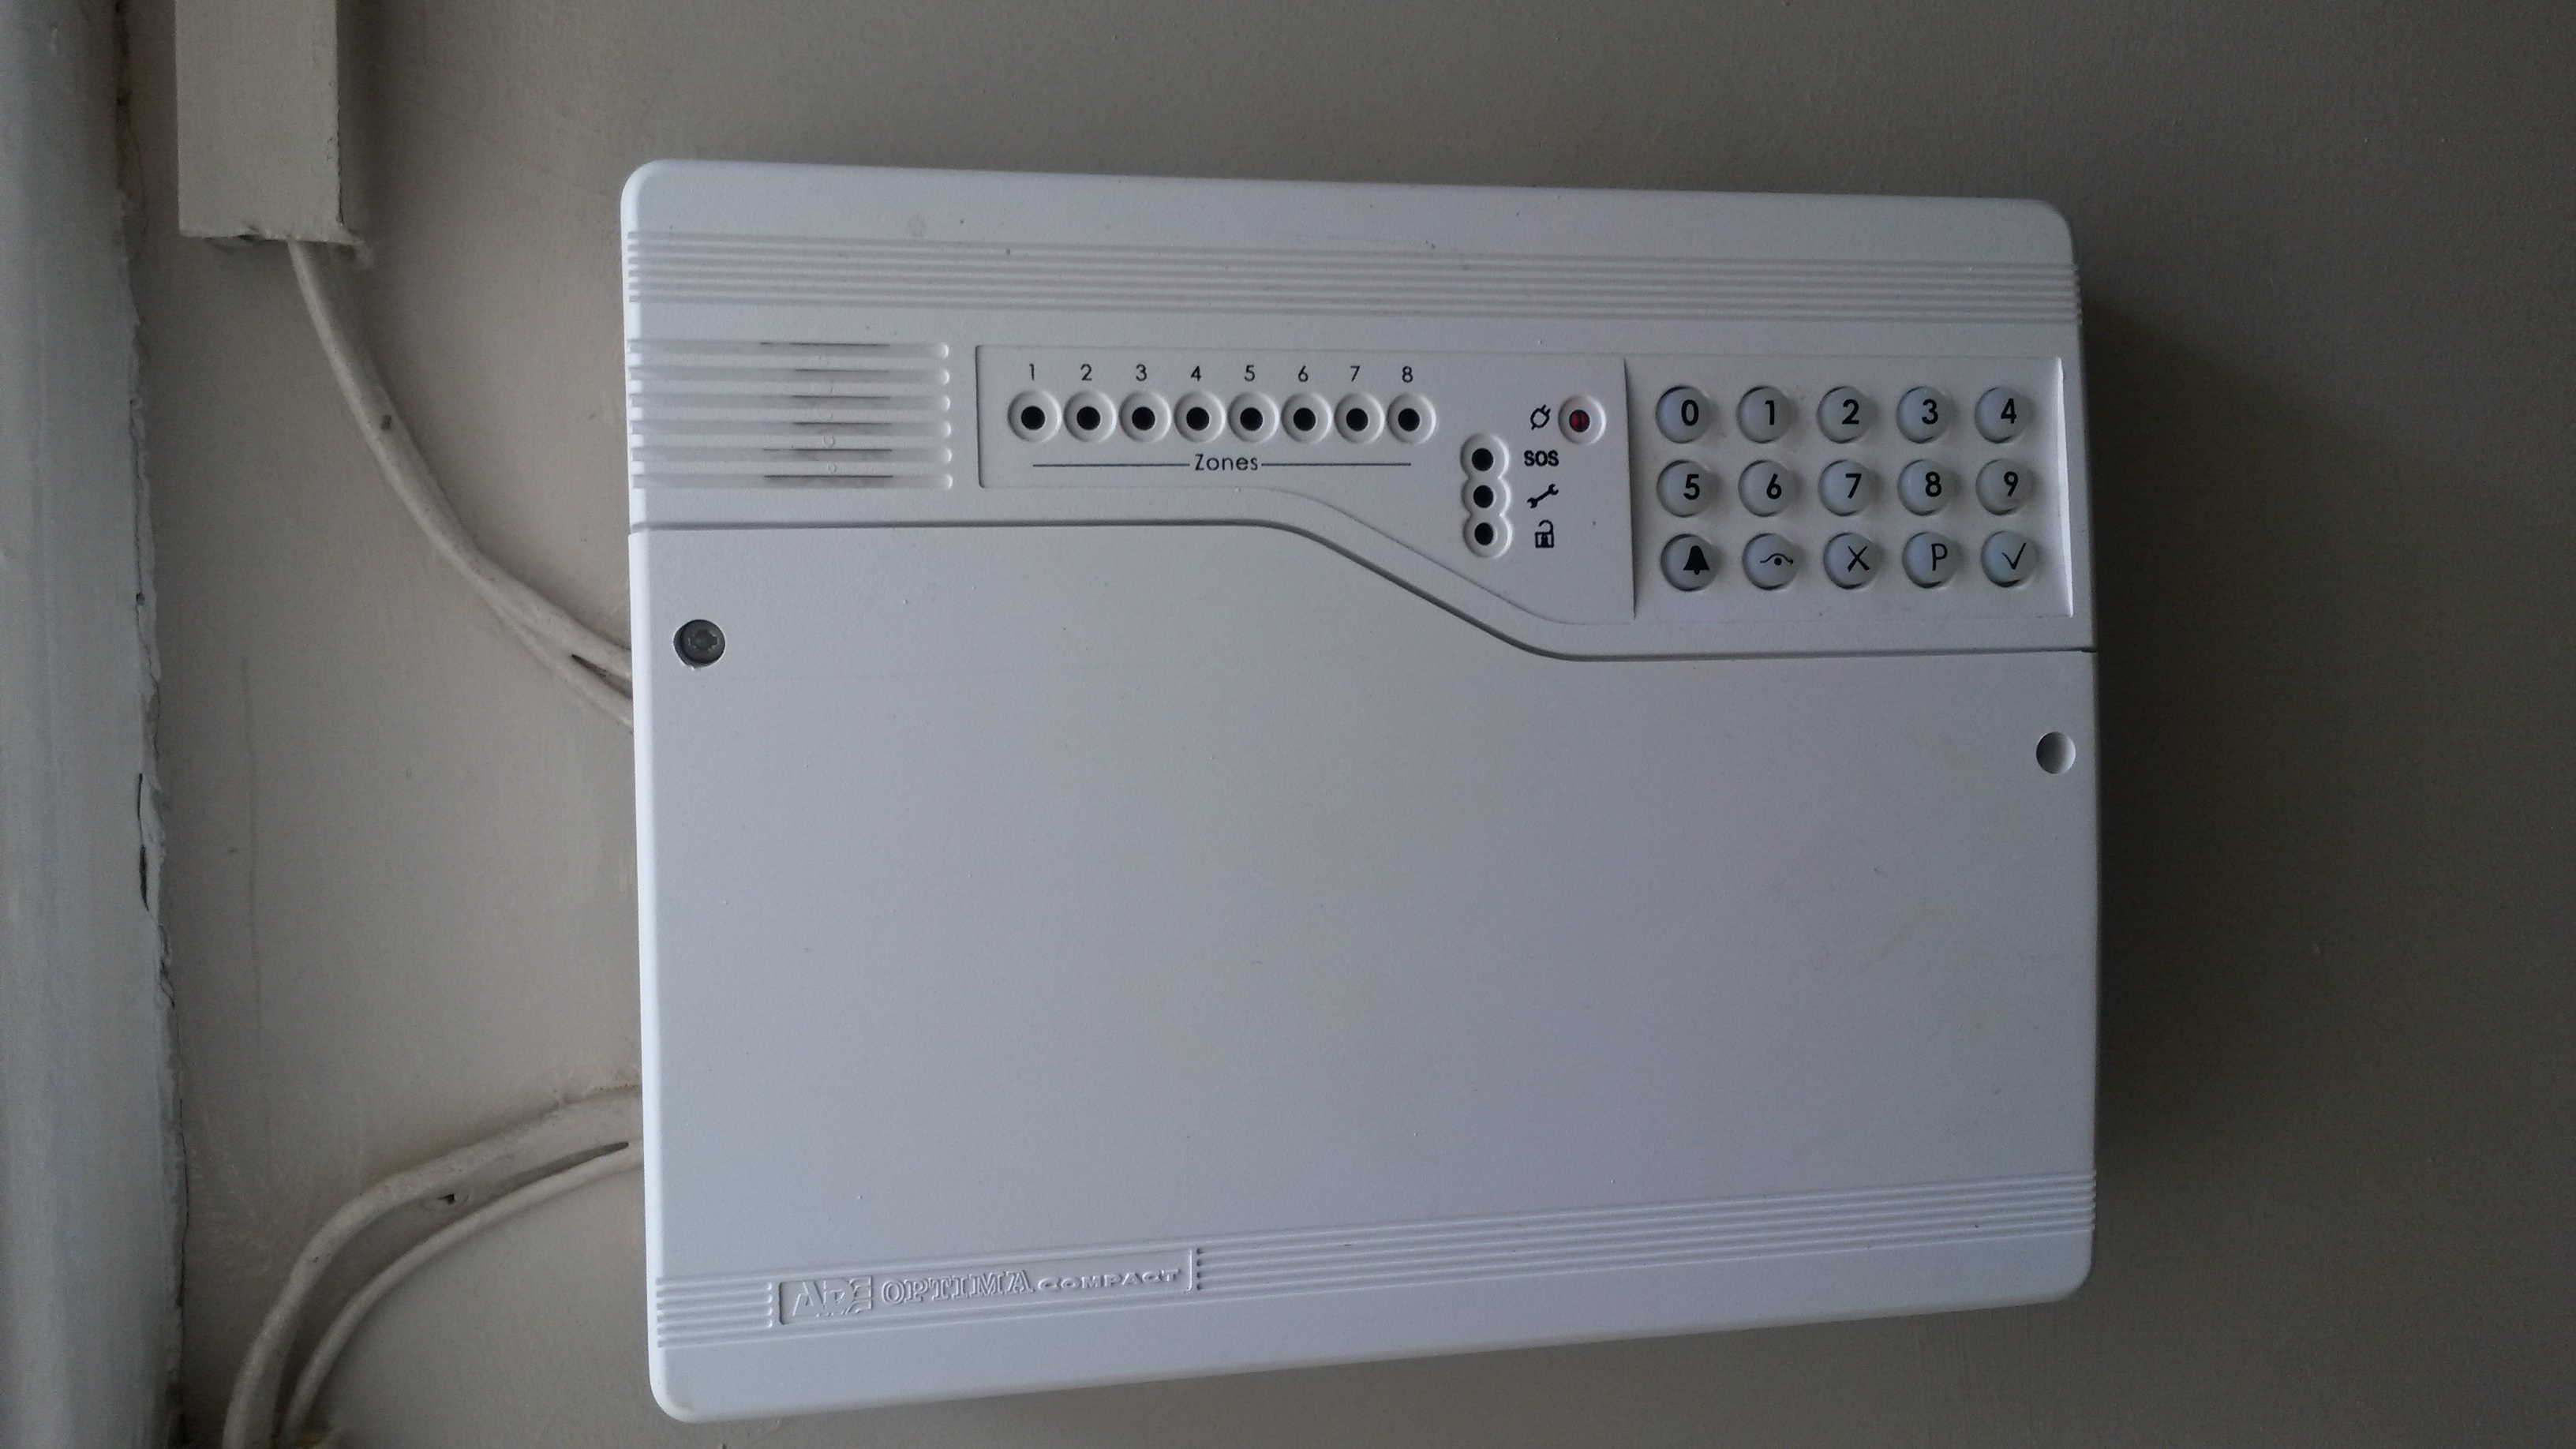 How to turn on scantronic 9427 | DIYnot Forums